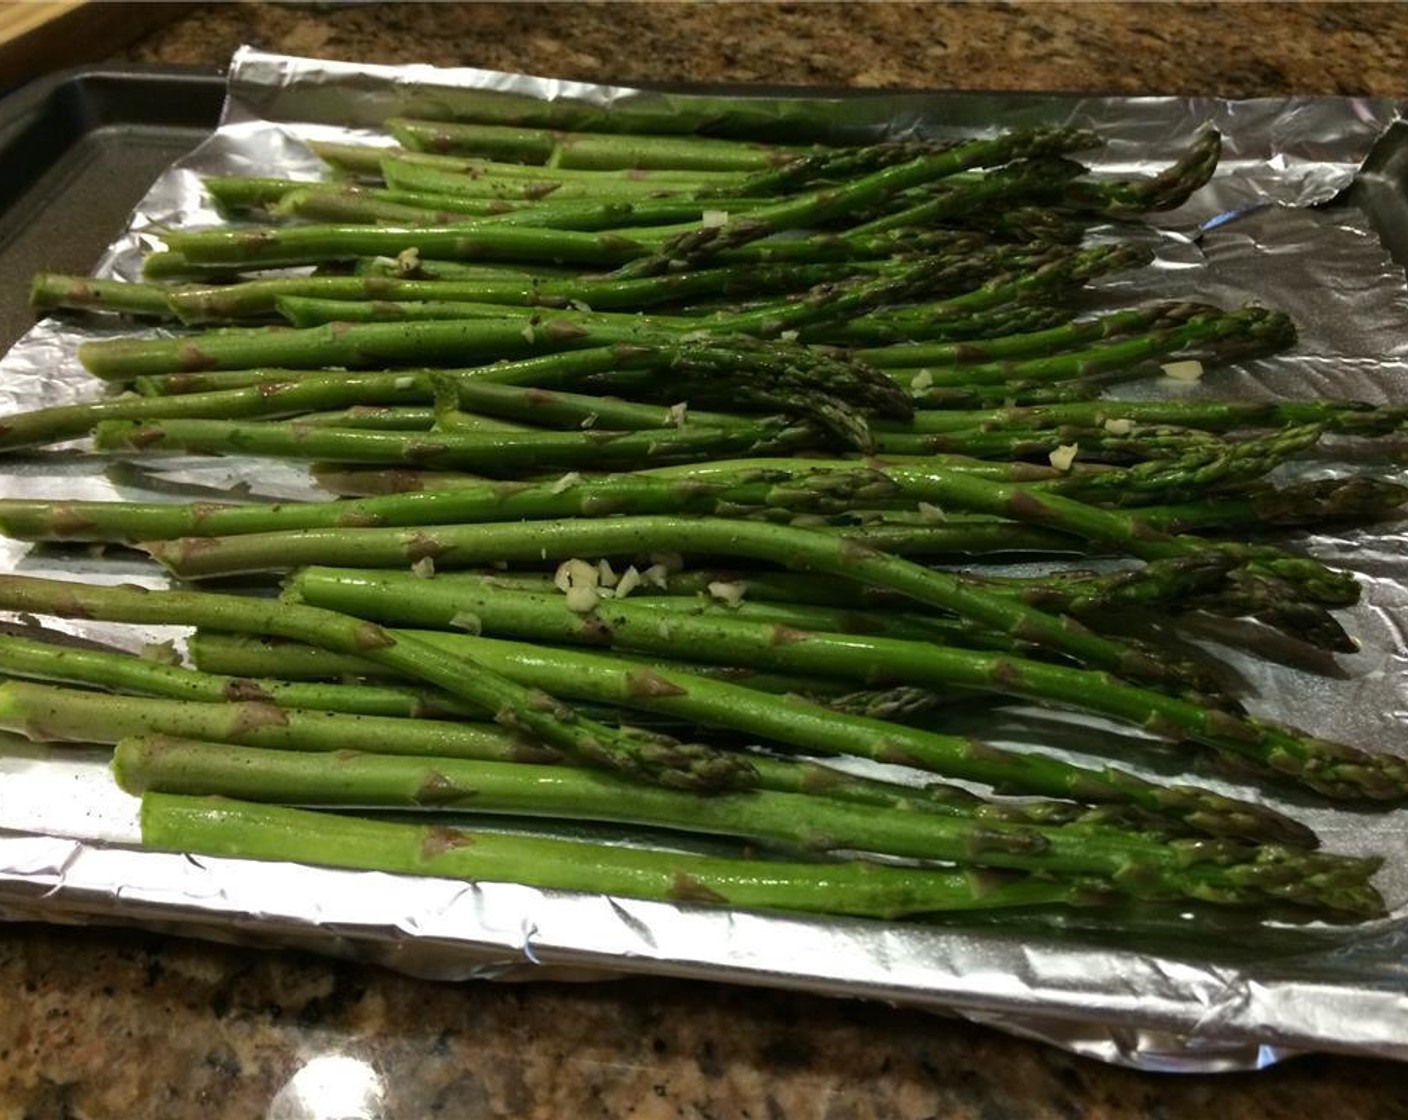 step 2 Place the Asparagus (1 bunch) on the pan and spread out evenly. Add Garlic (1 clove) and season with Salt (to taste) and Ground Black Pepper (to taste). Bake for 12 minutes or until tender.